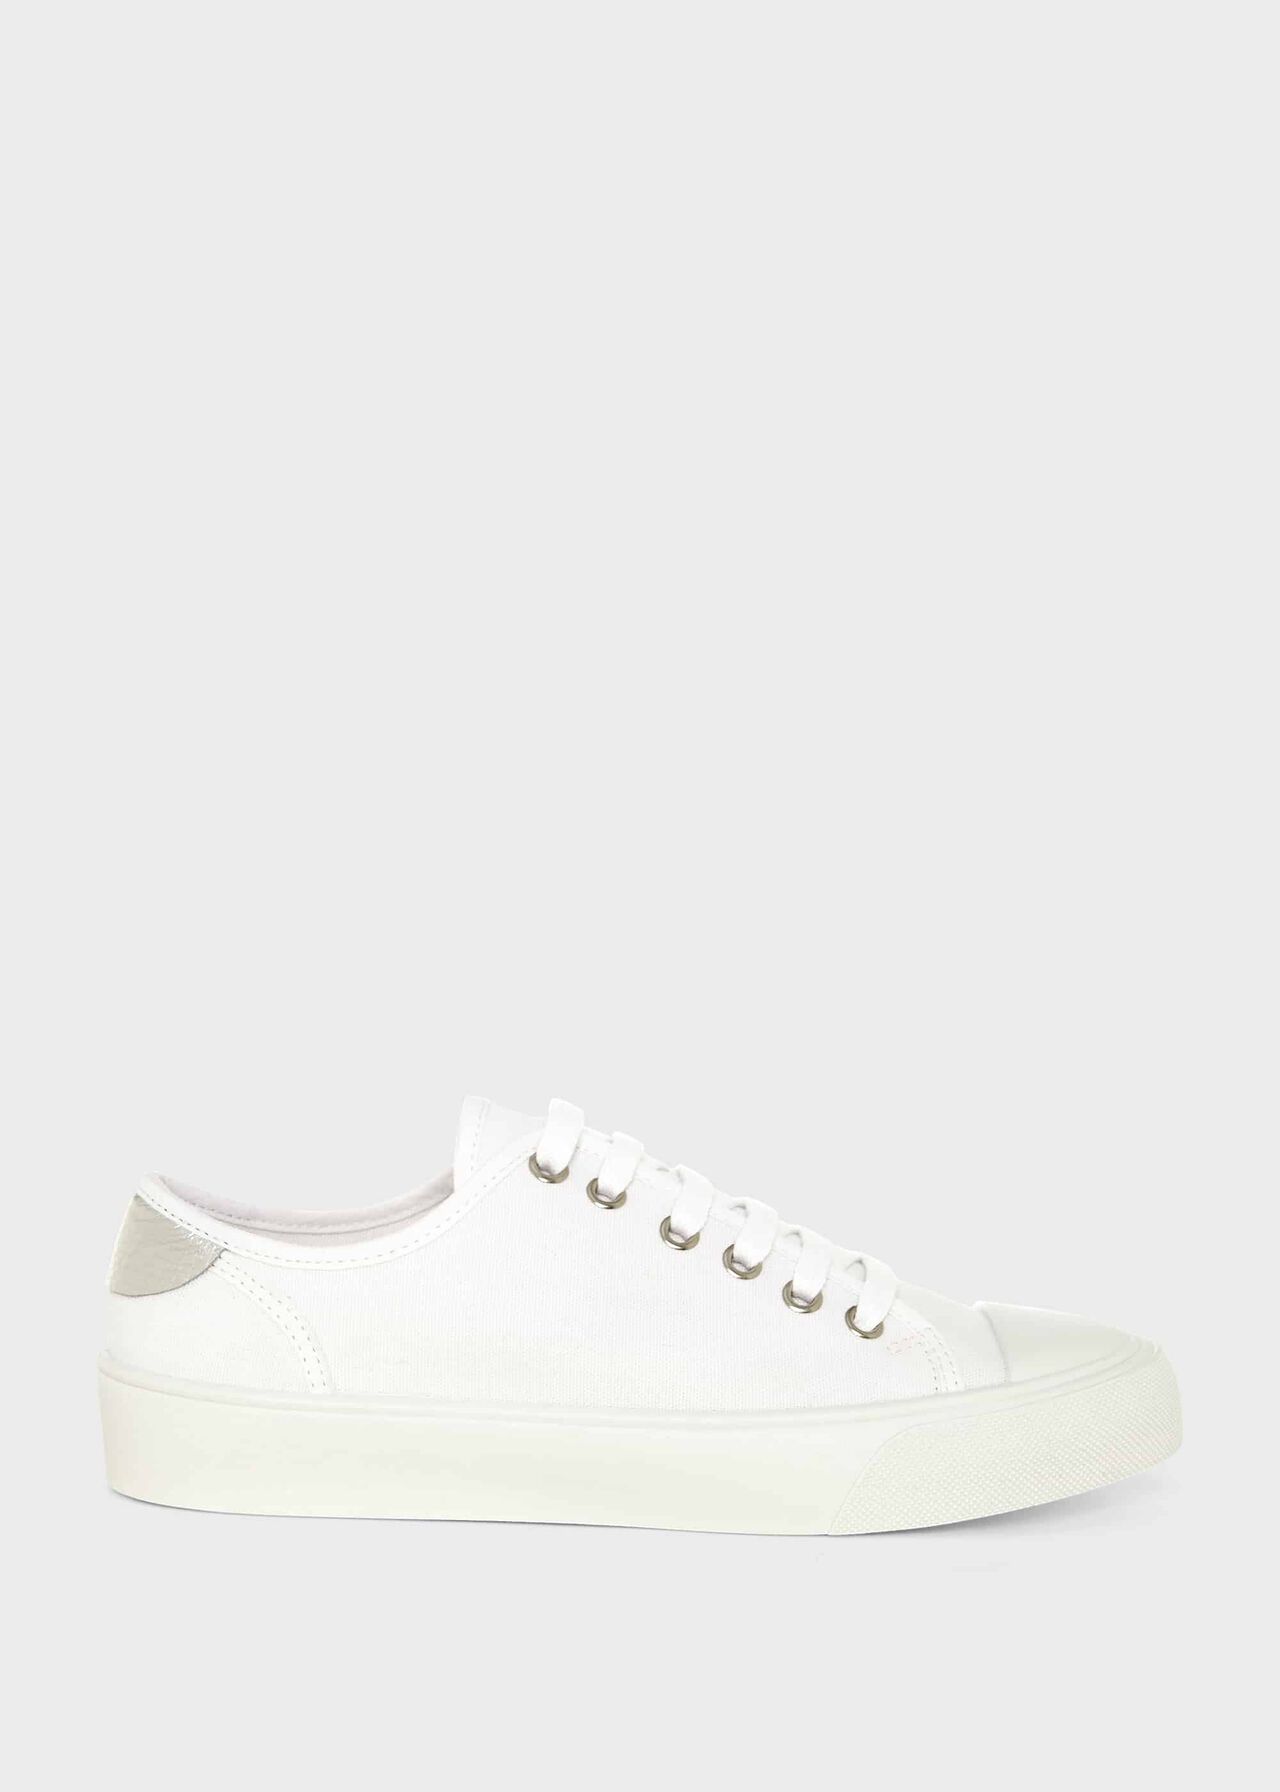 Bess Sneakers, White, hi-res